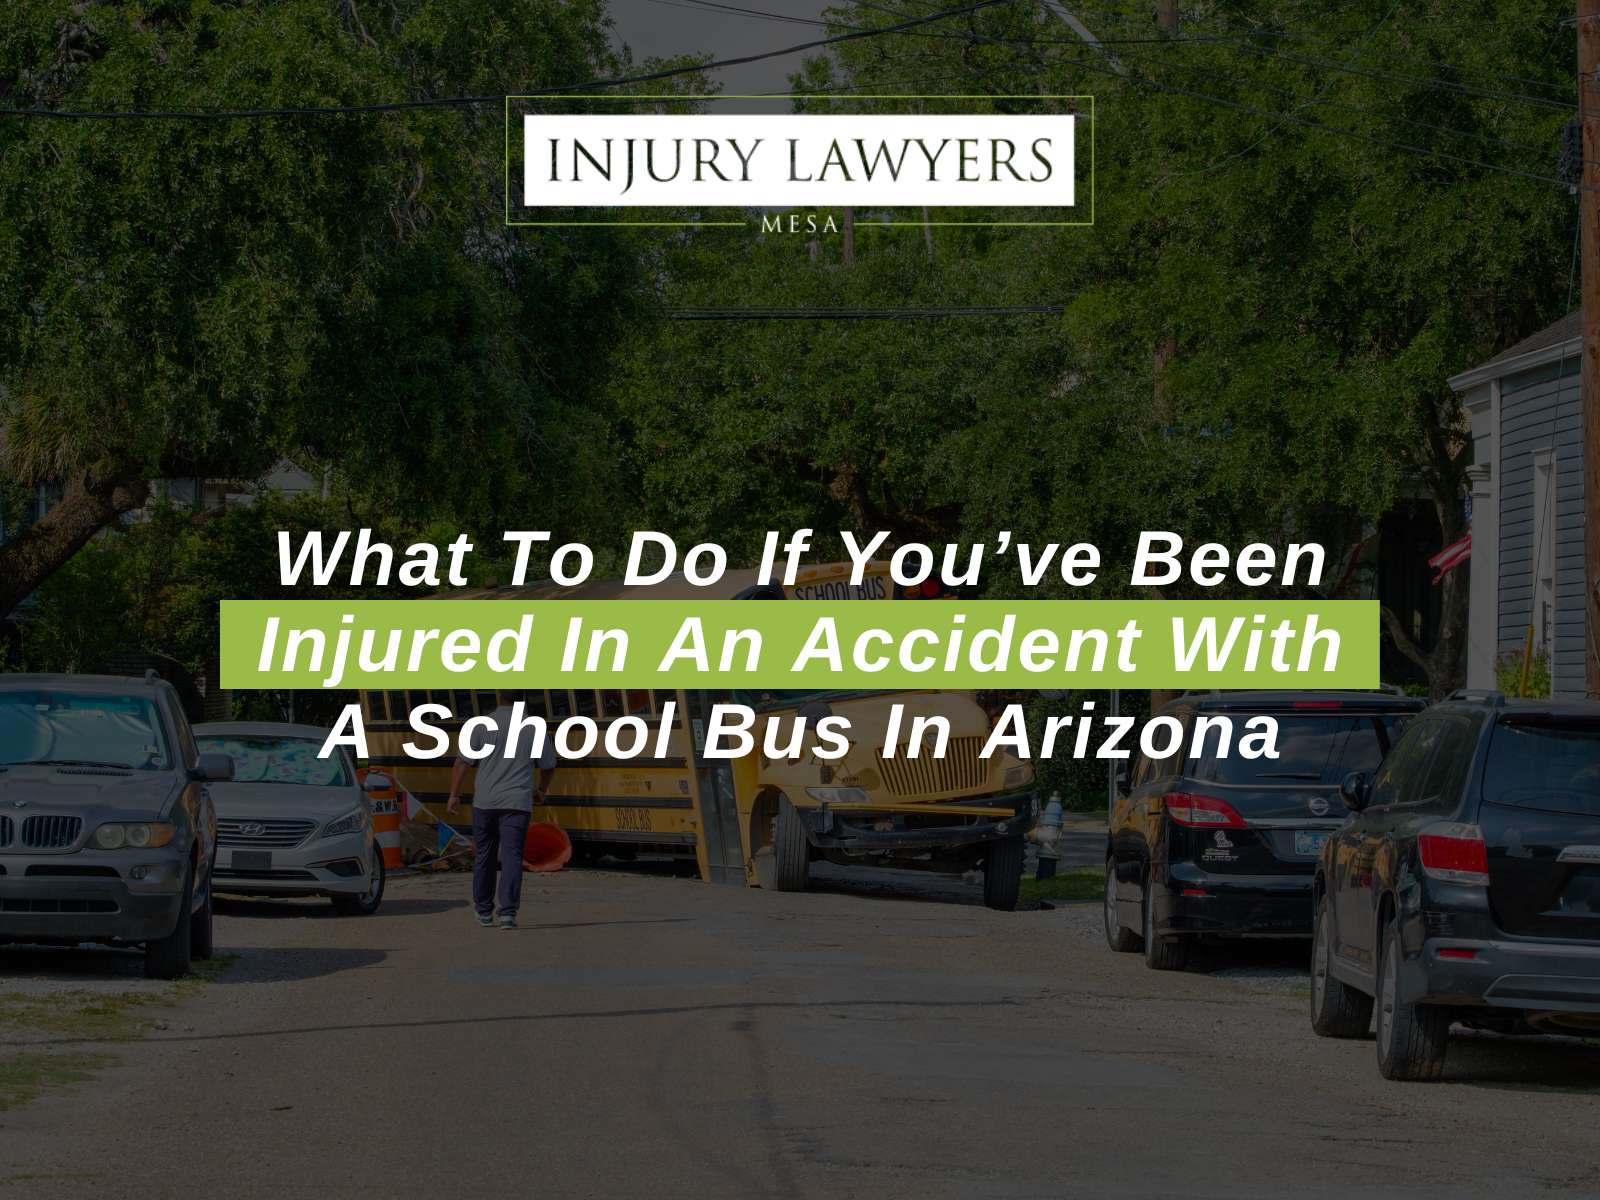 What To Do If You’ve Been Injured In An Accident With A School Bus In Arizona